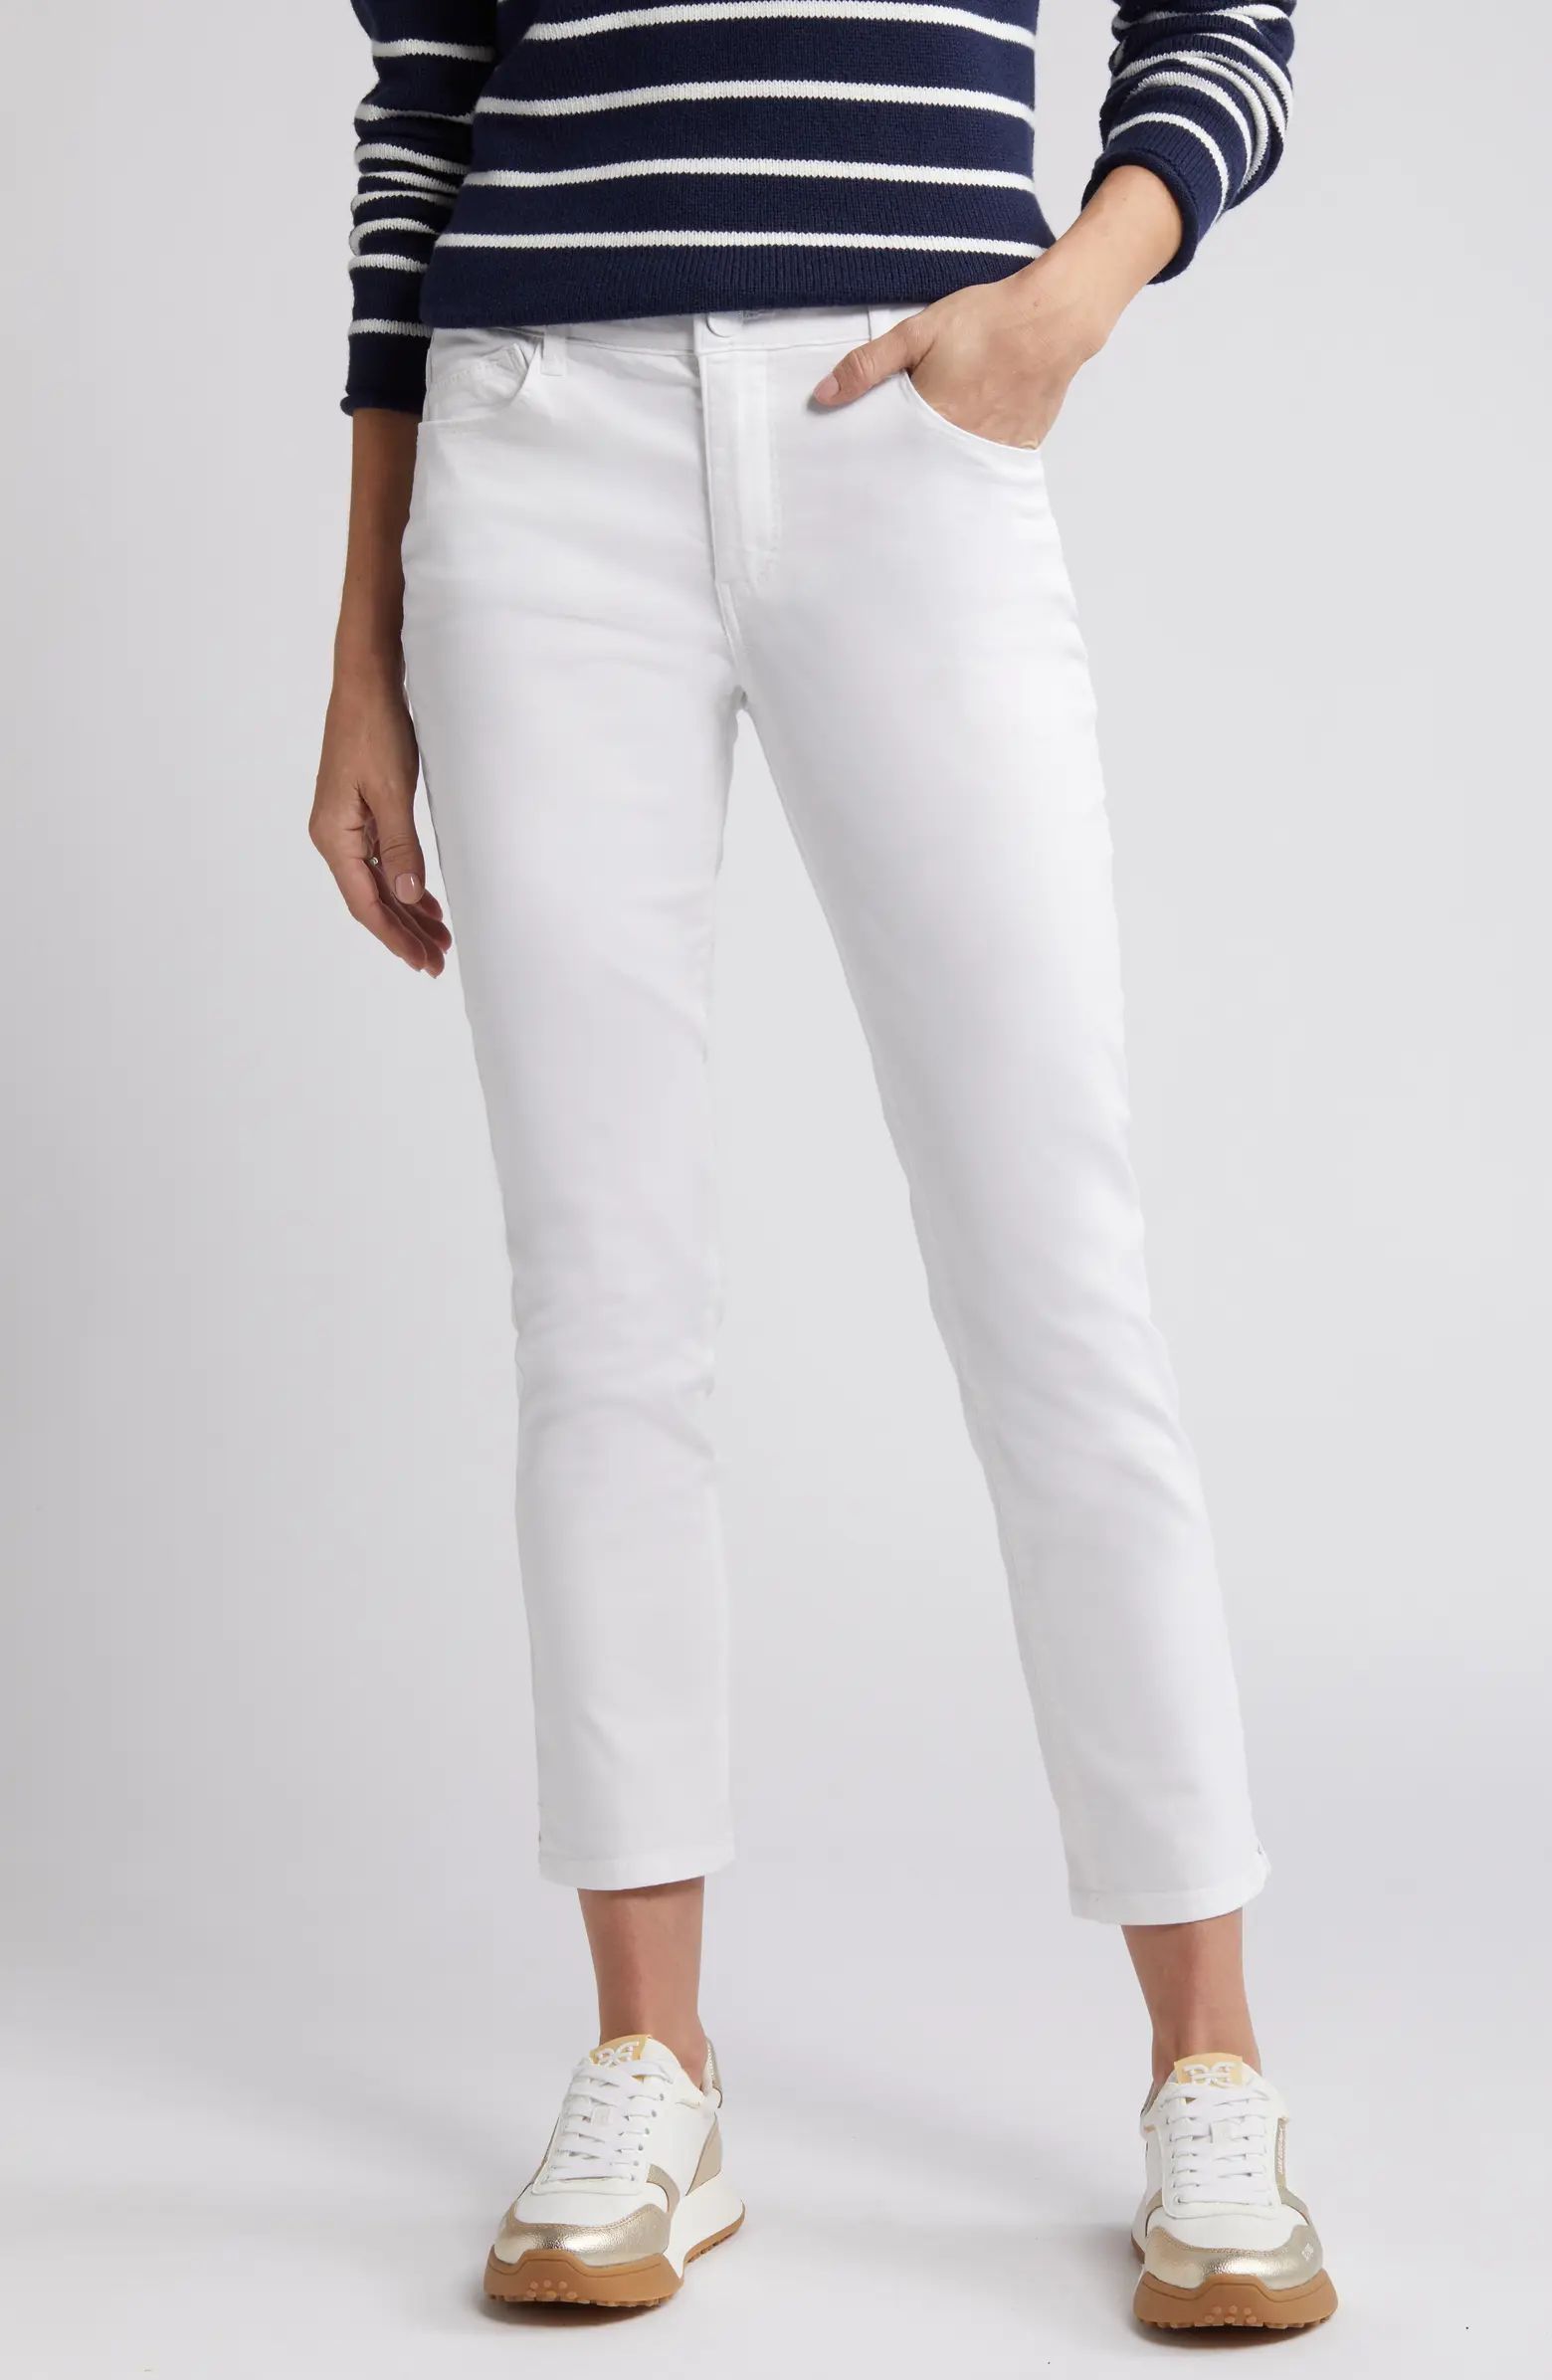 'Ab'Solution High Waist Slim Straight Ankle Pants | Nordstrom